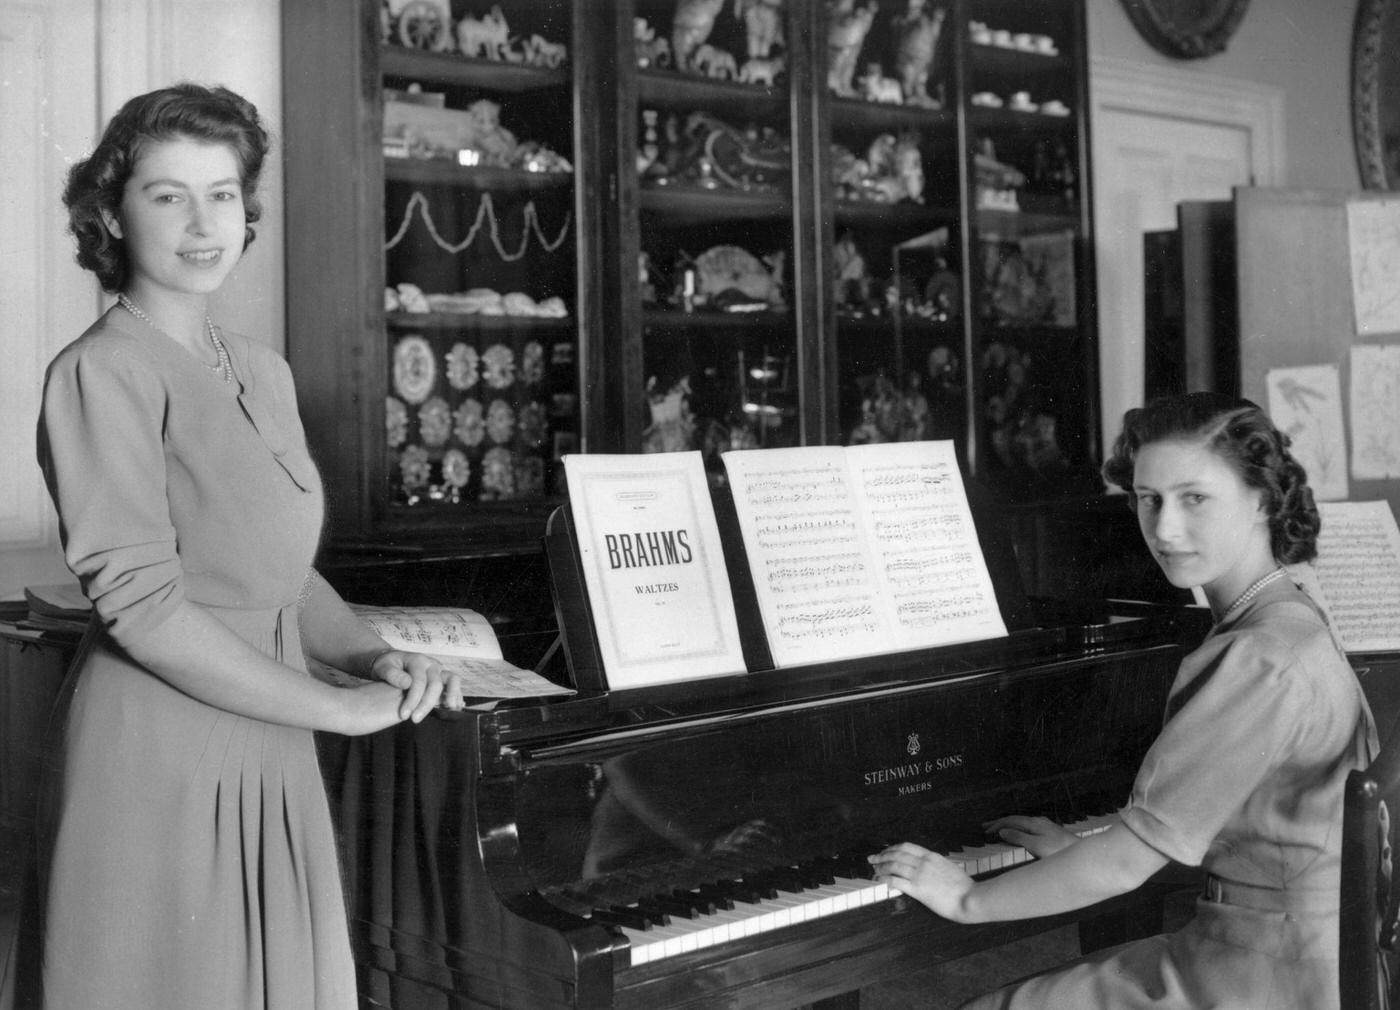 Princess Elizabeth and Princess Margaret Rose at a piano in the school room of Buckingham Palace, London, 19 July 1946.